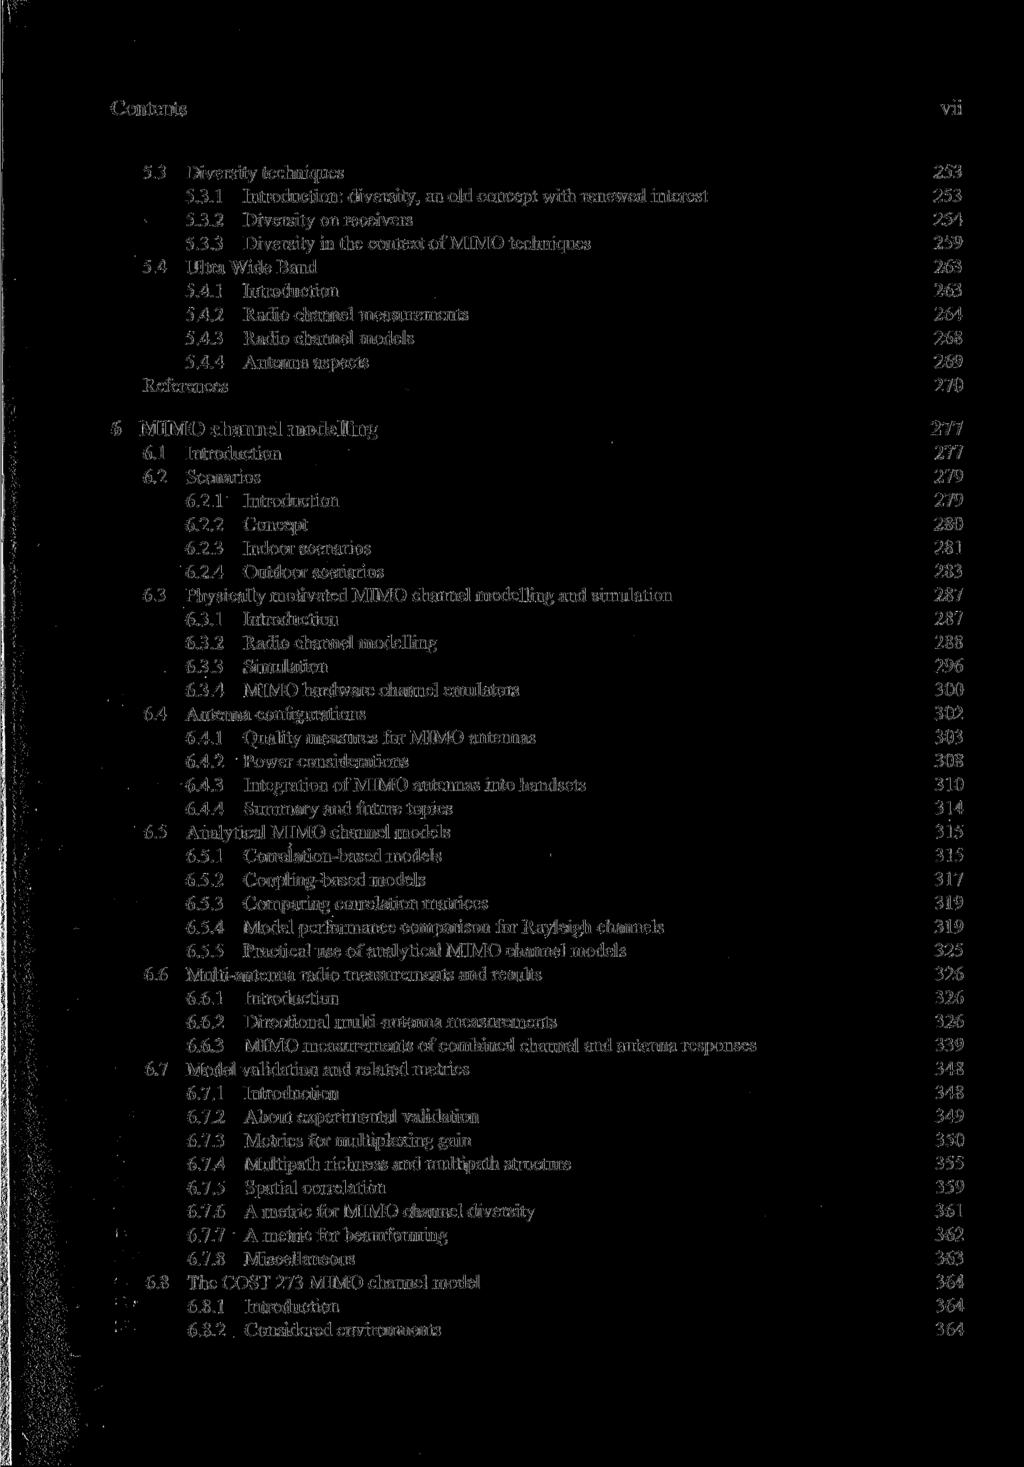 Contents Vll 5.3 Diversity techniques 253 5.3.1 Introduction: diversity, an old concept with renewed interest 253 5.3.2 Diversity on receivers 254 5.3.3 Diversity in the context of MIMO techniques 259 5.